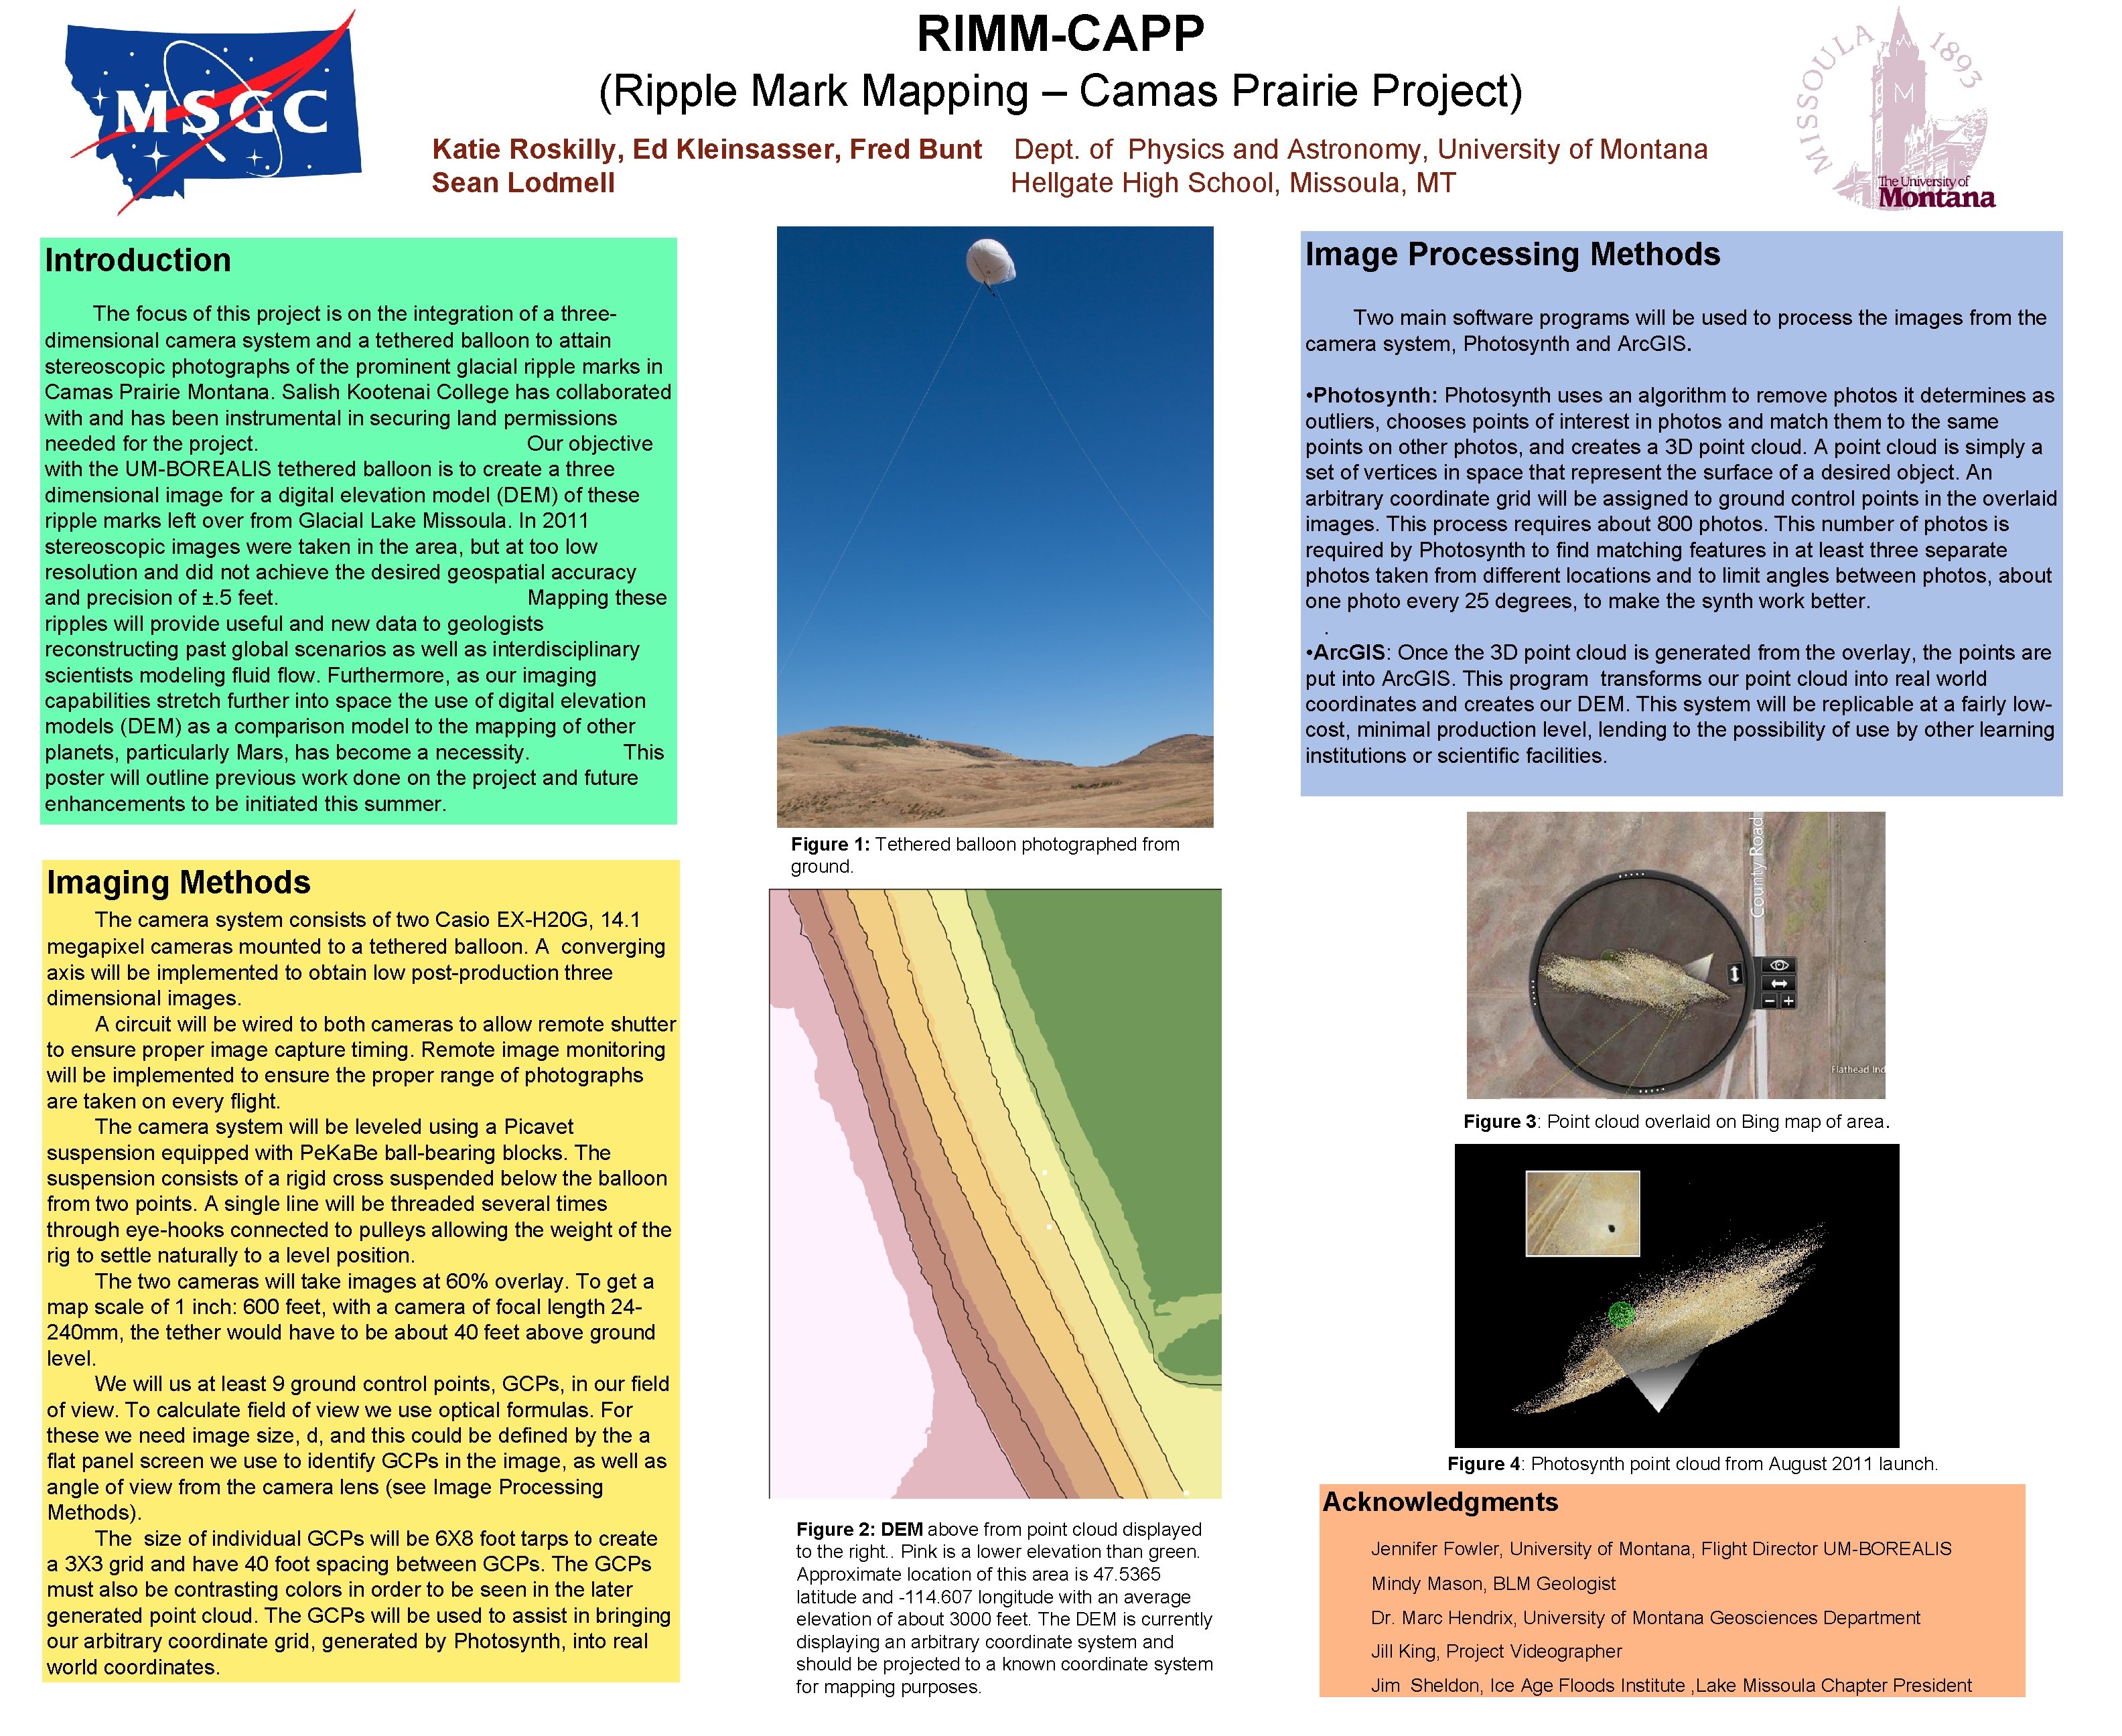 RIMM-CAPP (Ripple Mark Mapping – Camas Prairie Project) Katie Roskilly, Ed Kleinsasser, Fred Bunt